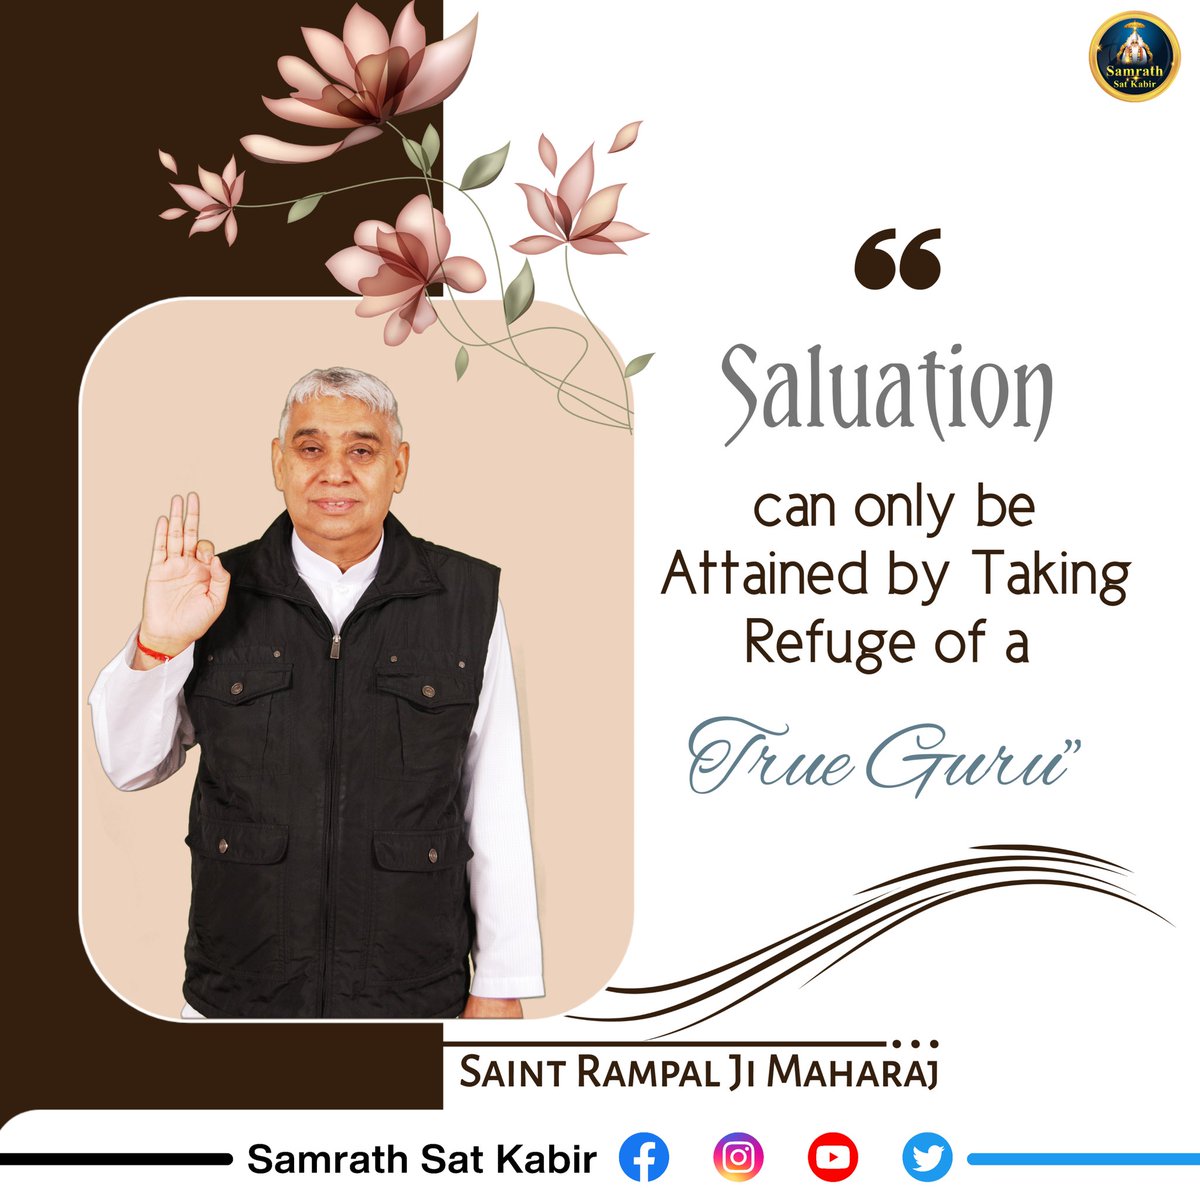 #GodMorningTuesday
'Saluation can only be Attained by Taking Refuge of a True Guru'
#SaintRampalJiQuotes